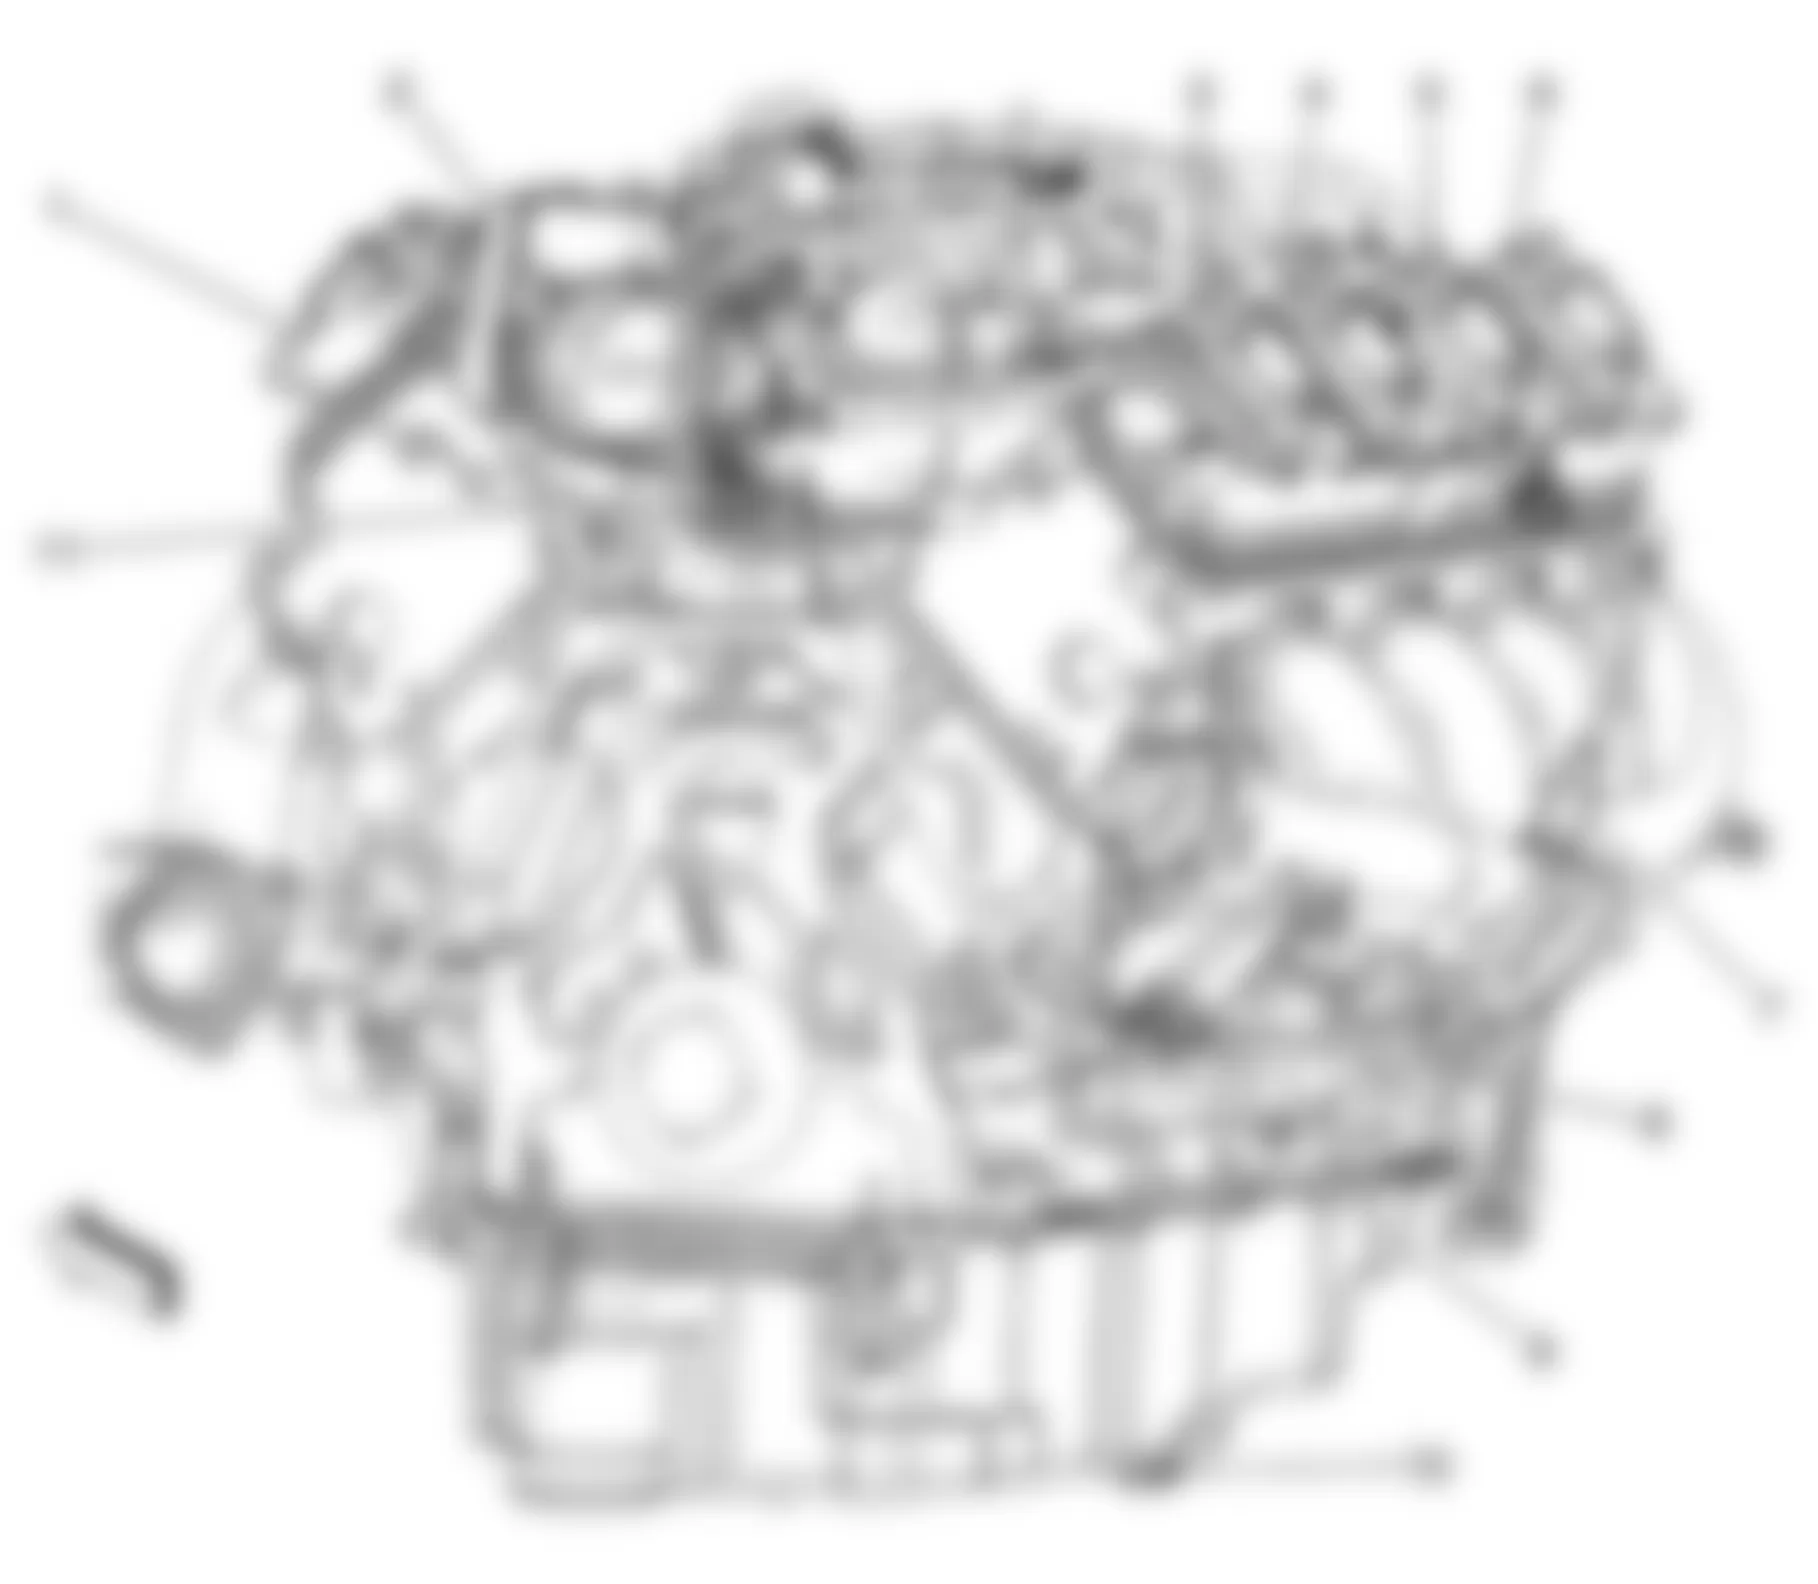 Buick Allure CXL 2008 - Component Locations -  Rear Of Engine (5.3L)